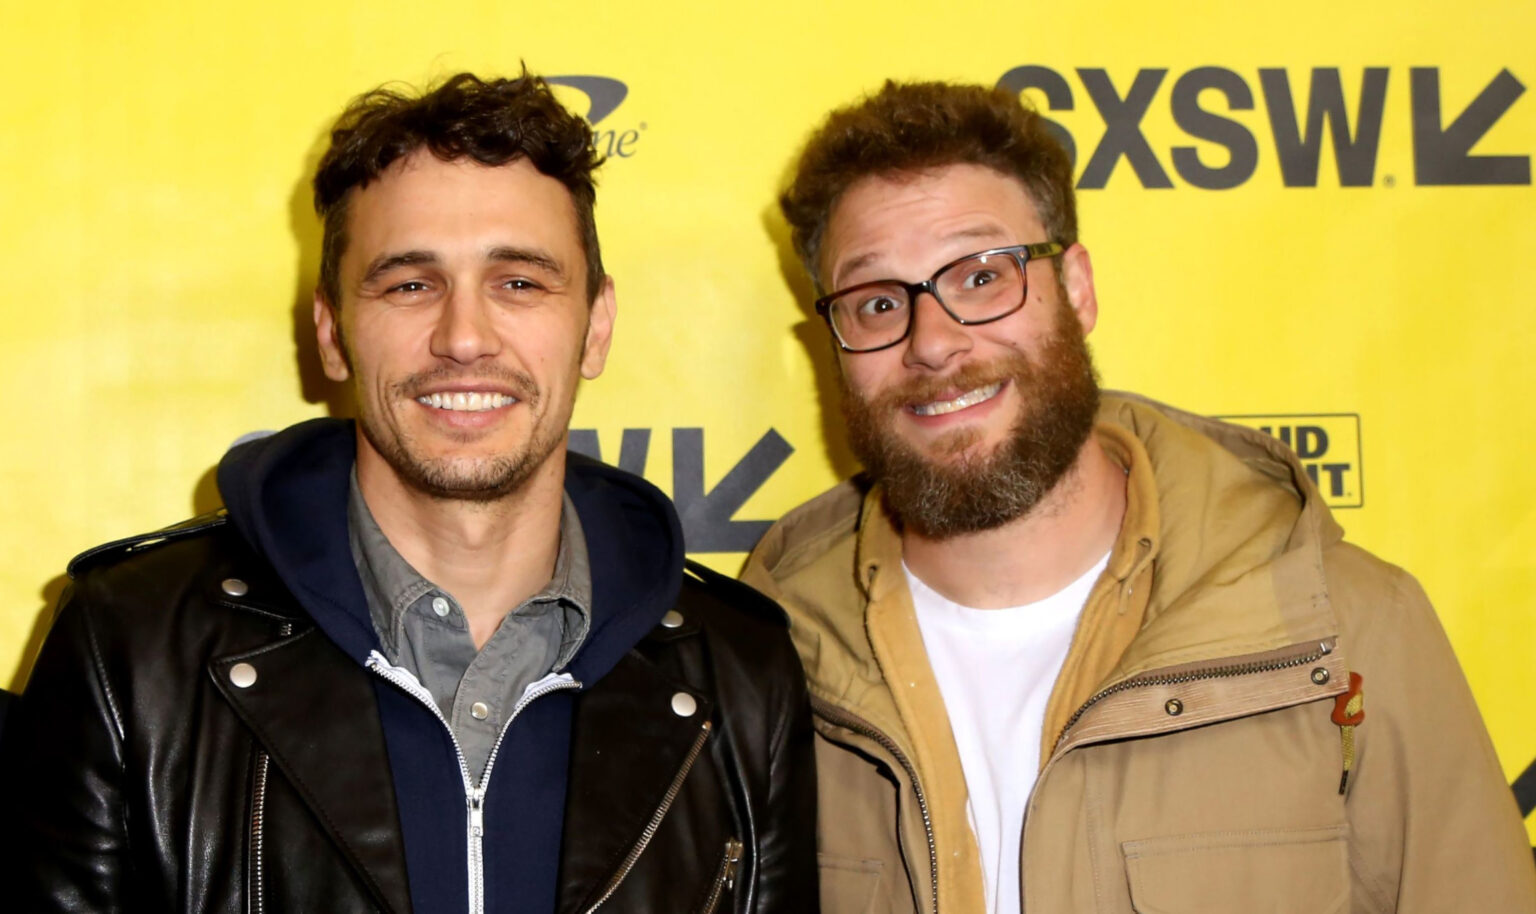 Is Seth Rogen still buddies with James Franco? Find out why one actress is speaking out against their relationship in the wake of abuse allegations.